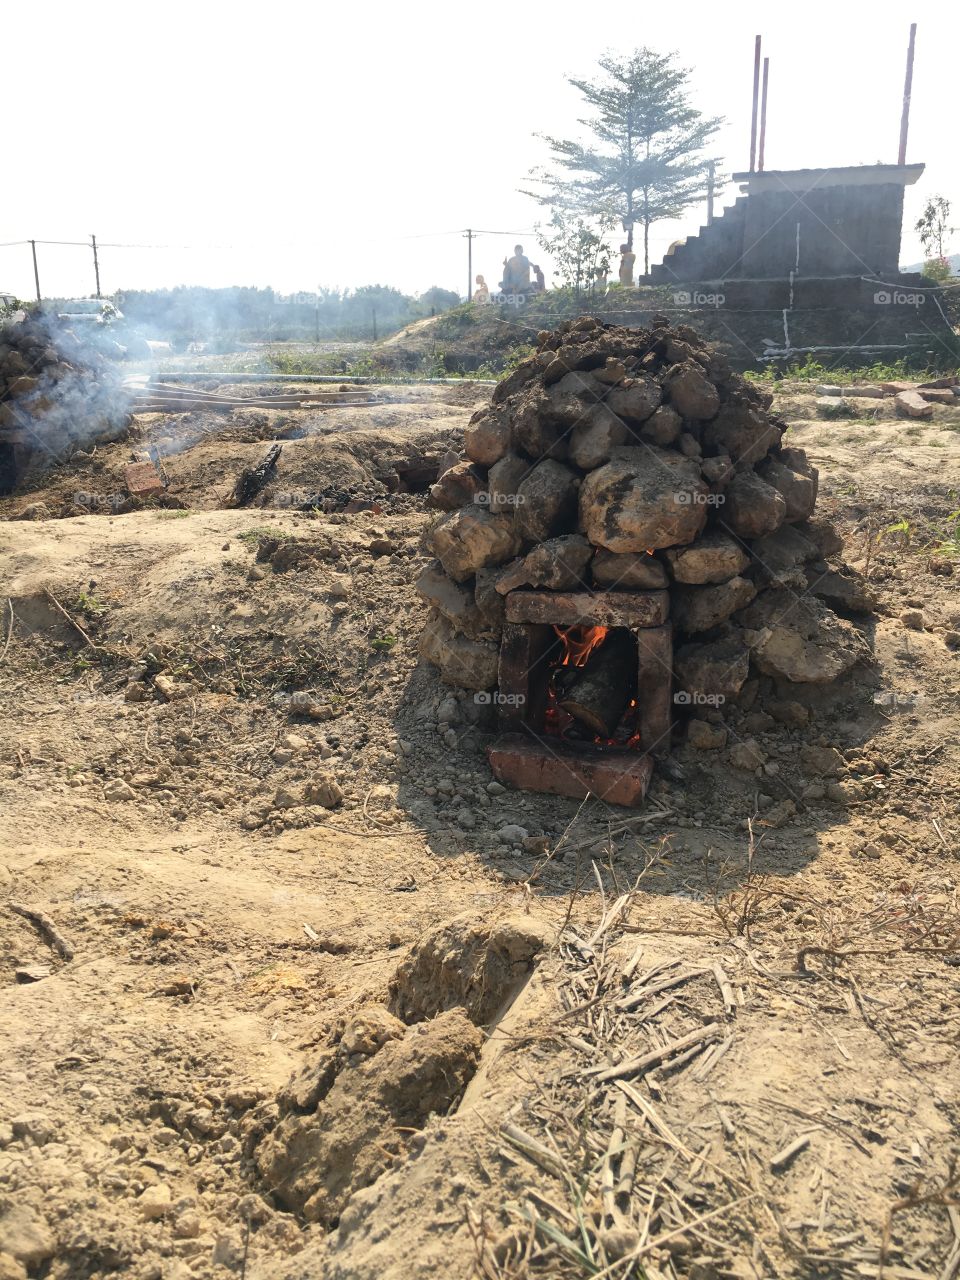 Earth oven in china 